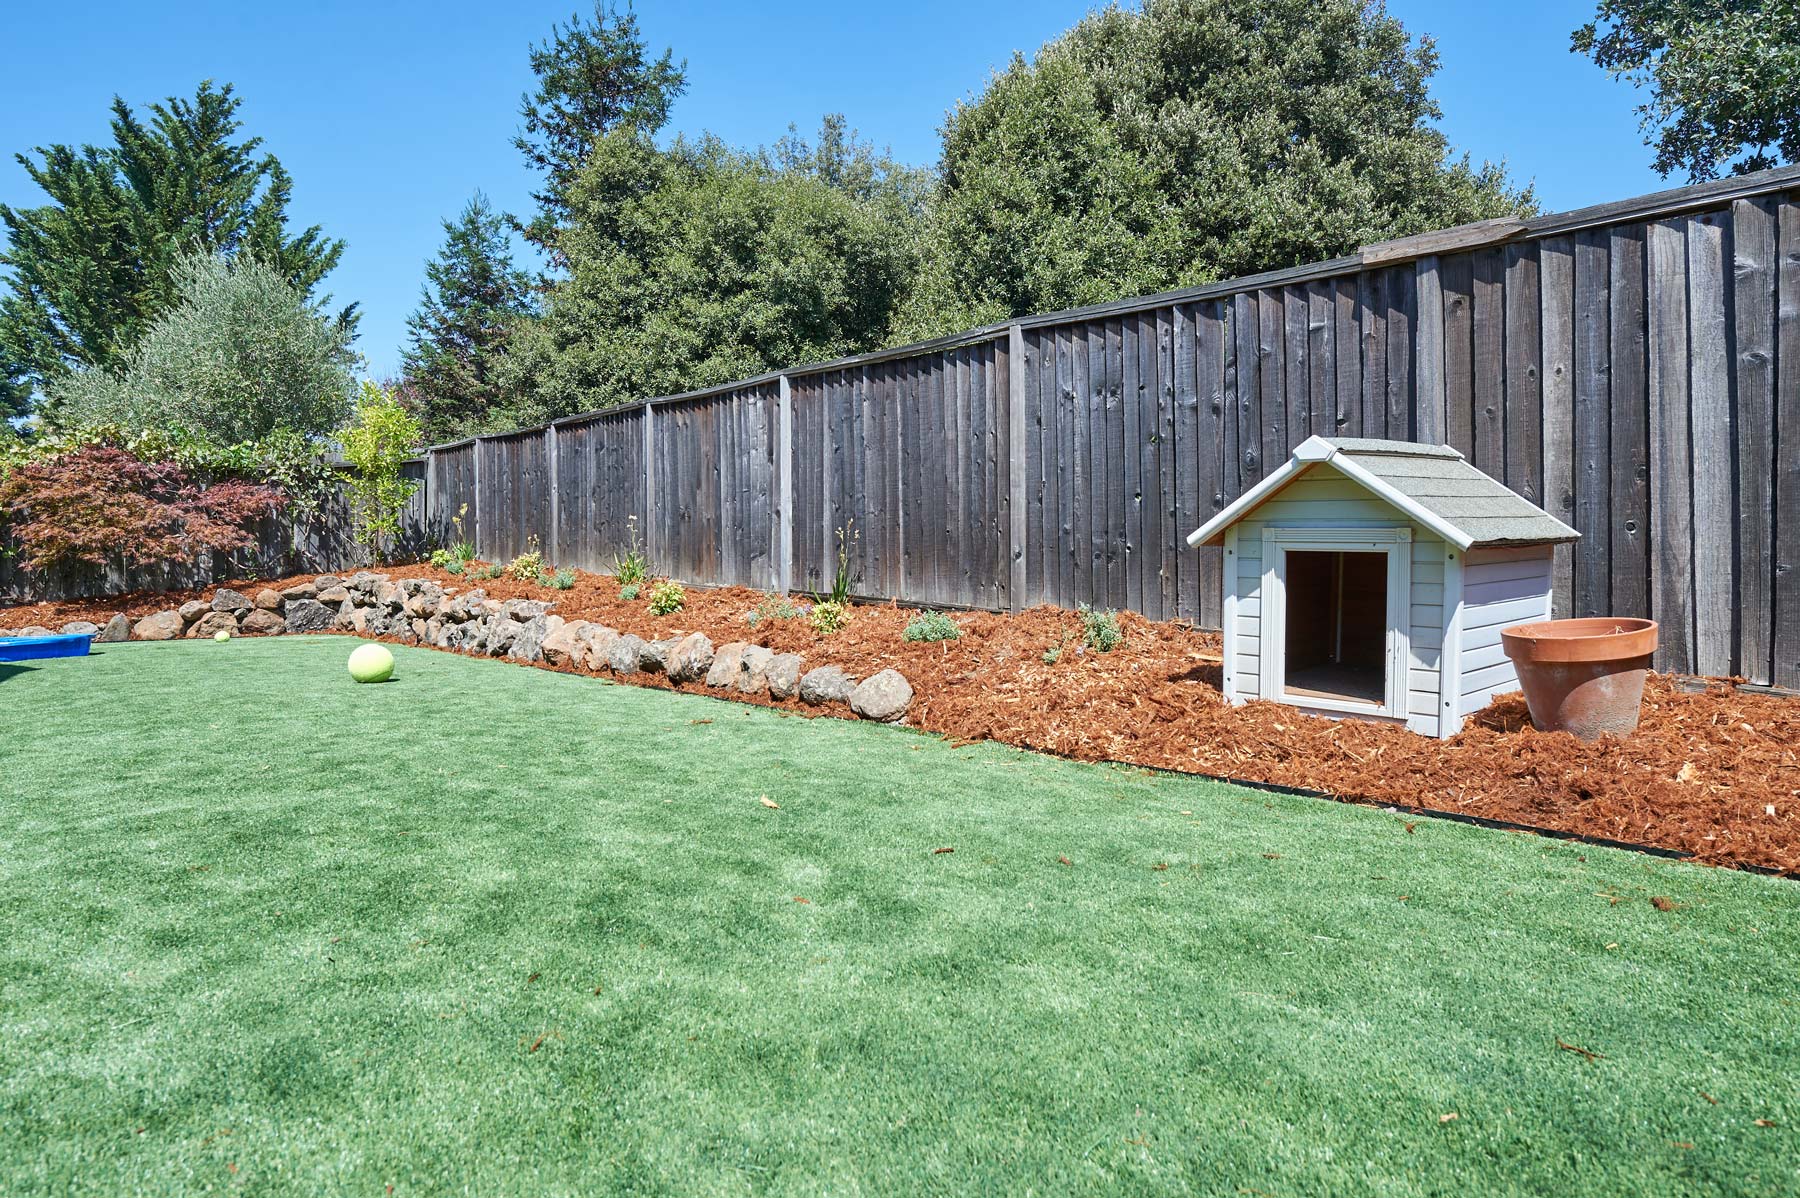 Northview Landscaping Project Gallery | Artificial Lawn Installation